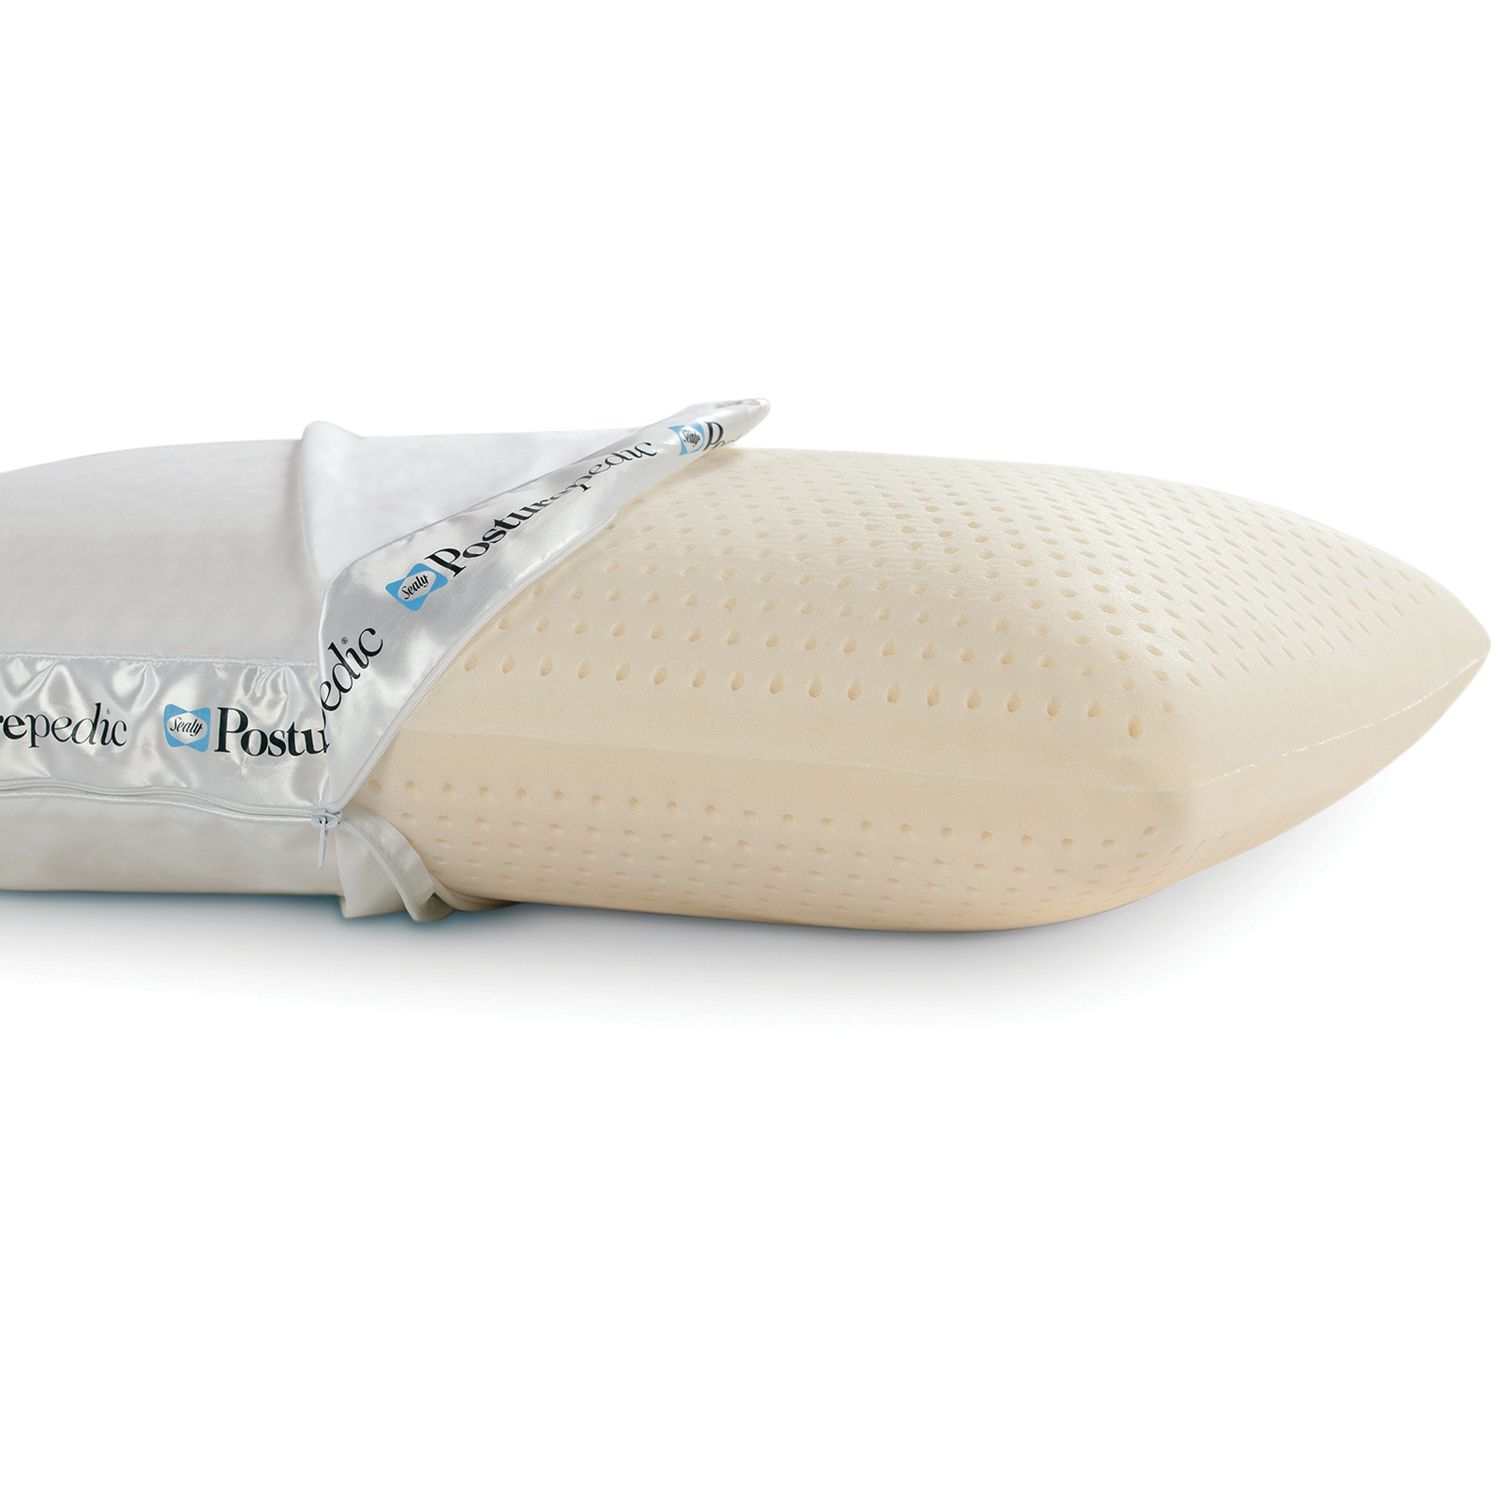 Sealy Latex Pillow - Standard